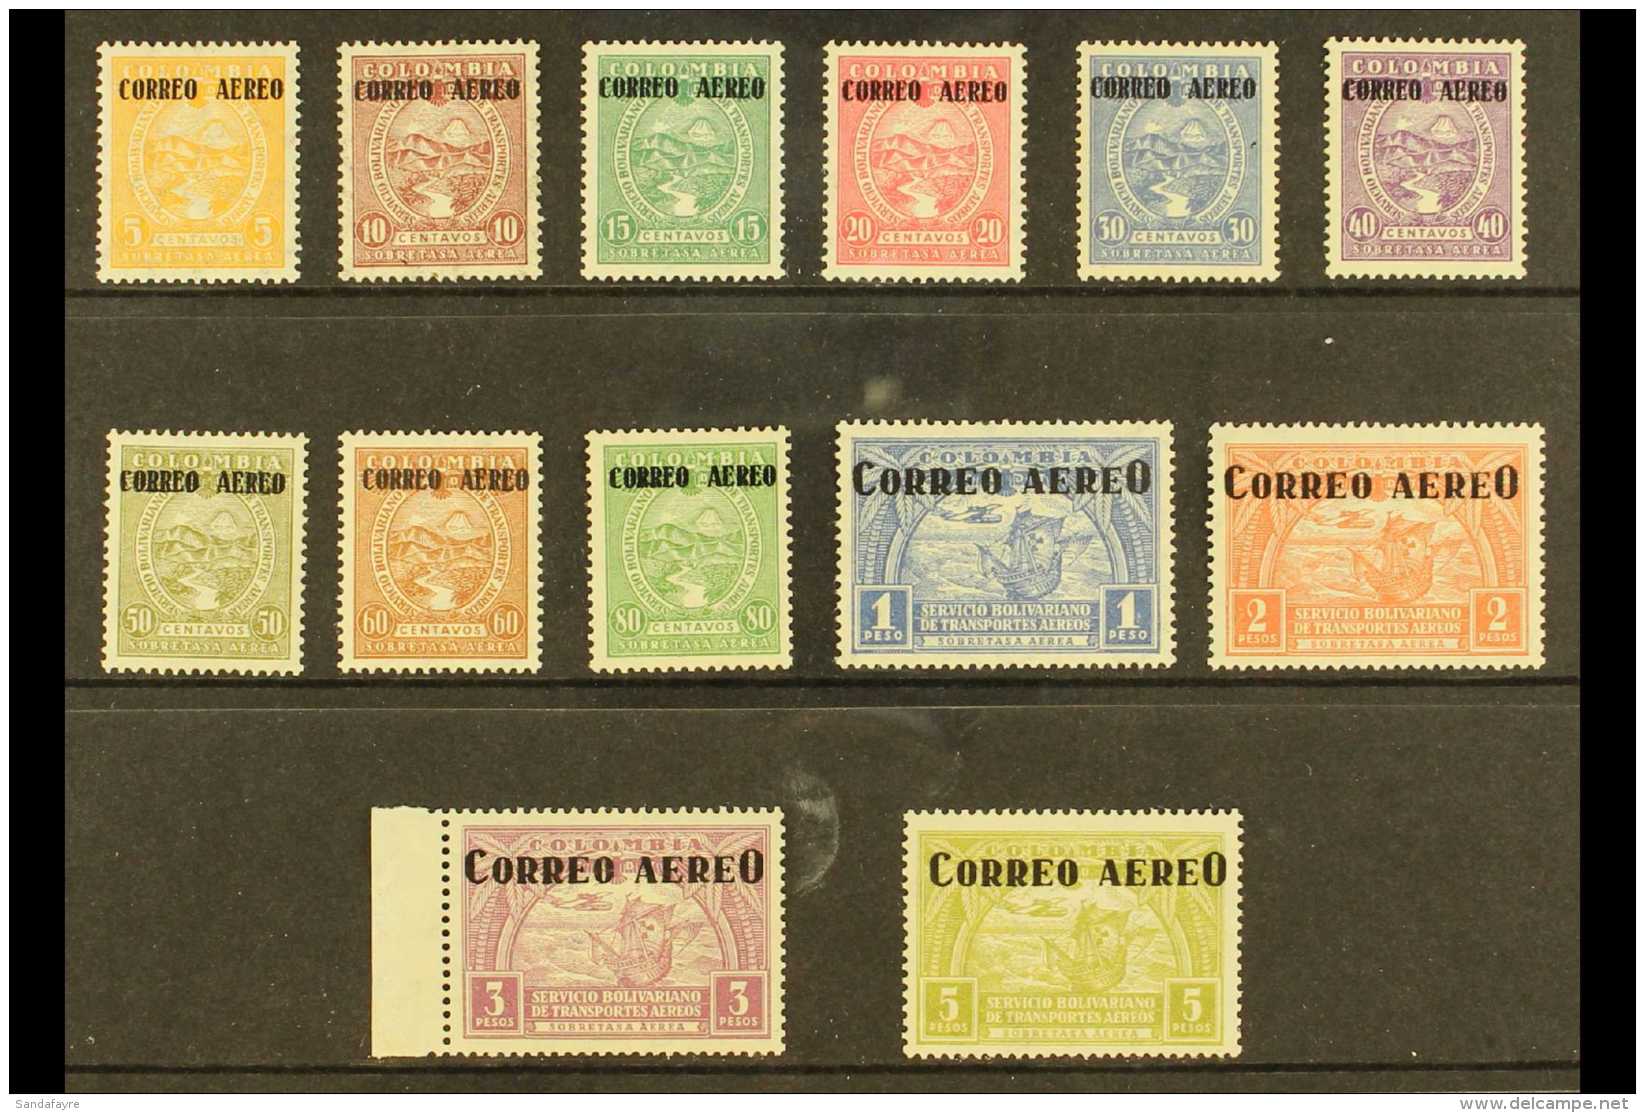 1932 Air "Correo Aereo" Overprints Complete Set (Scott C83/95, SG 413/25, Michel 305/17), Fine Mint Mostly With... - Colombia